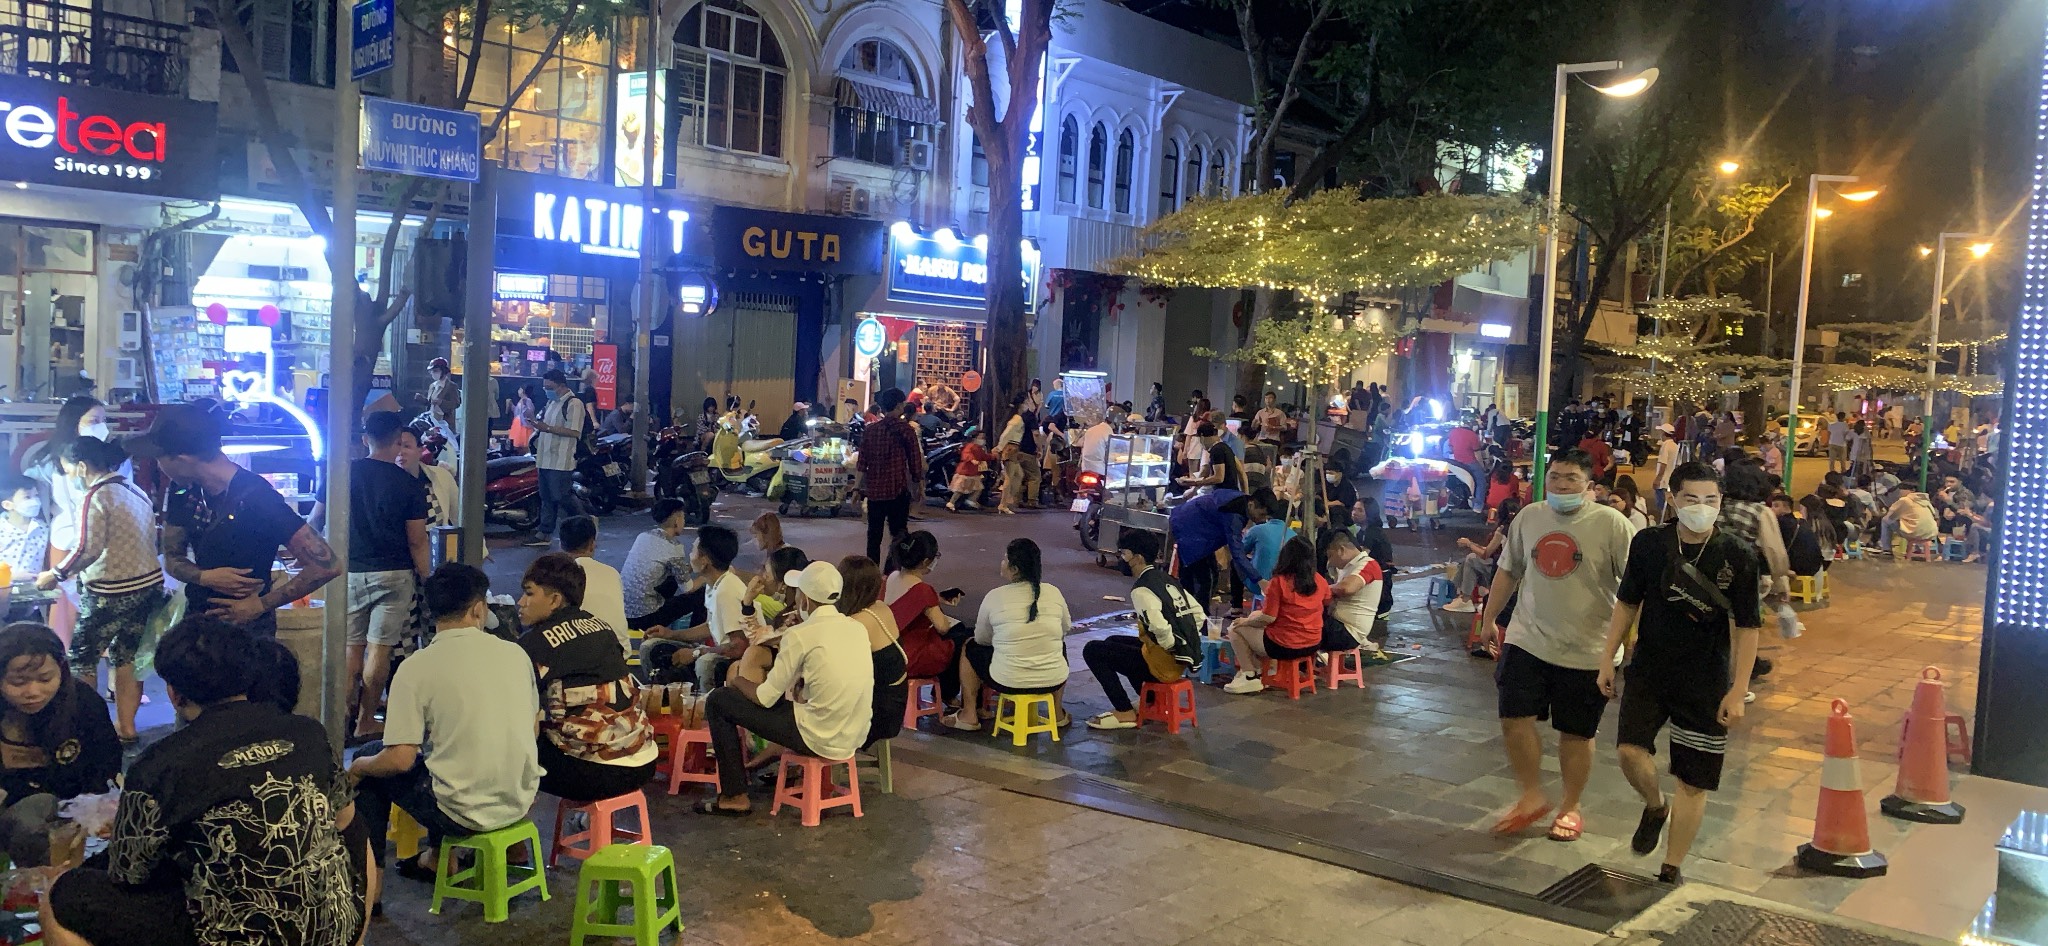 Residents enjoy street food and drinks on Nguyen Hue Walking Street in District 1, Ho Chi Minh City, January 31, 2022. Photo: T.T.D. / Tuoi Tre